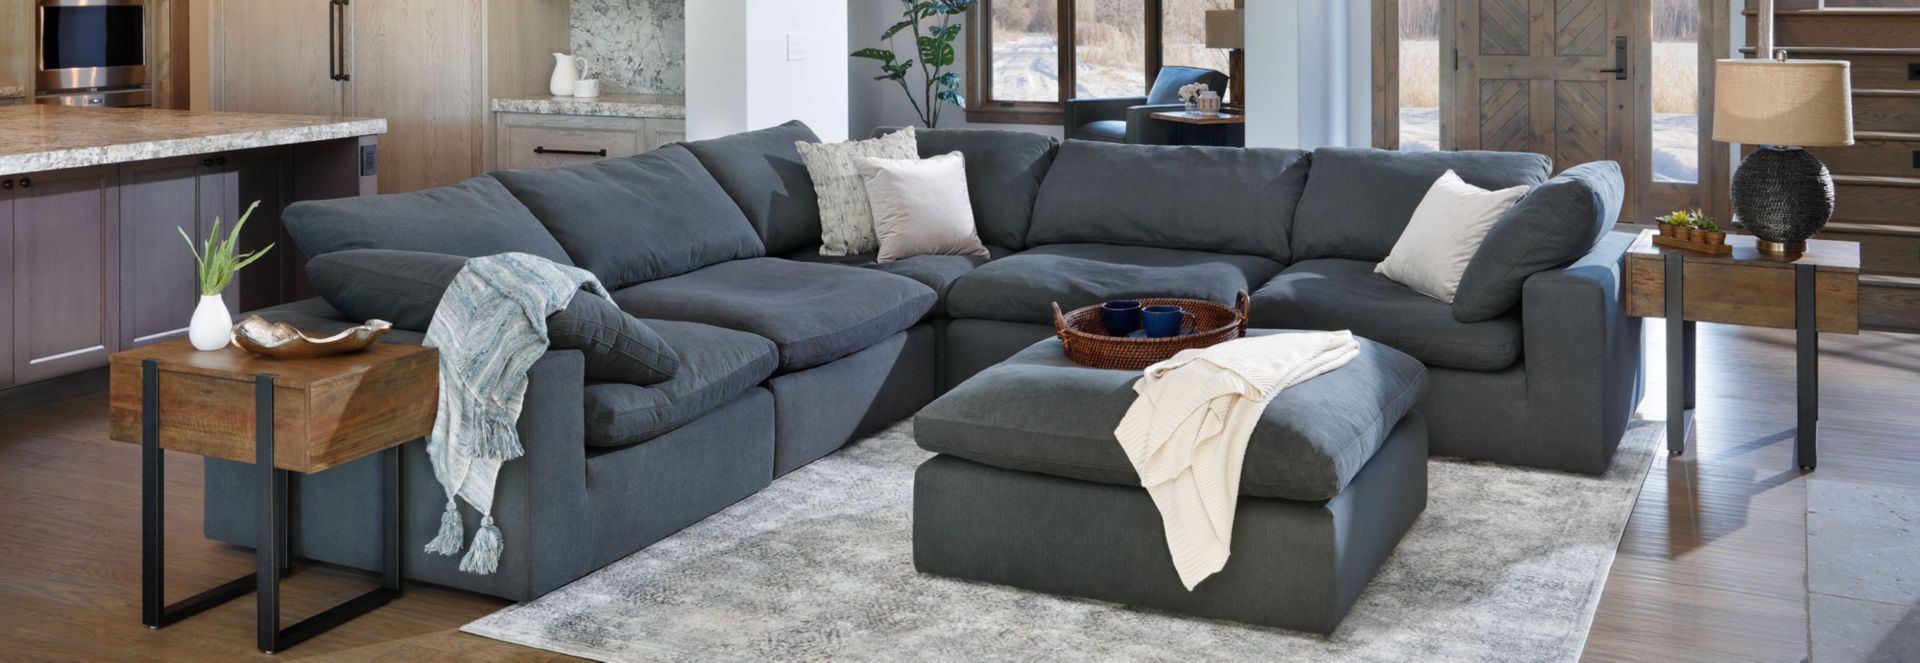 Charcoal Gray Modular Sectional in Room